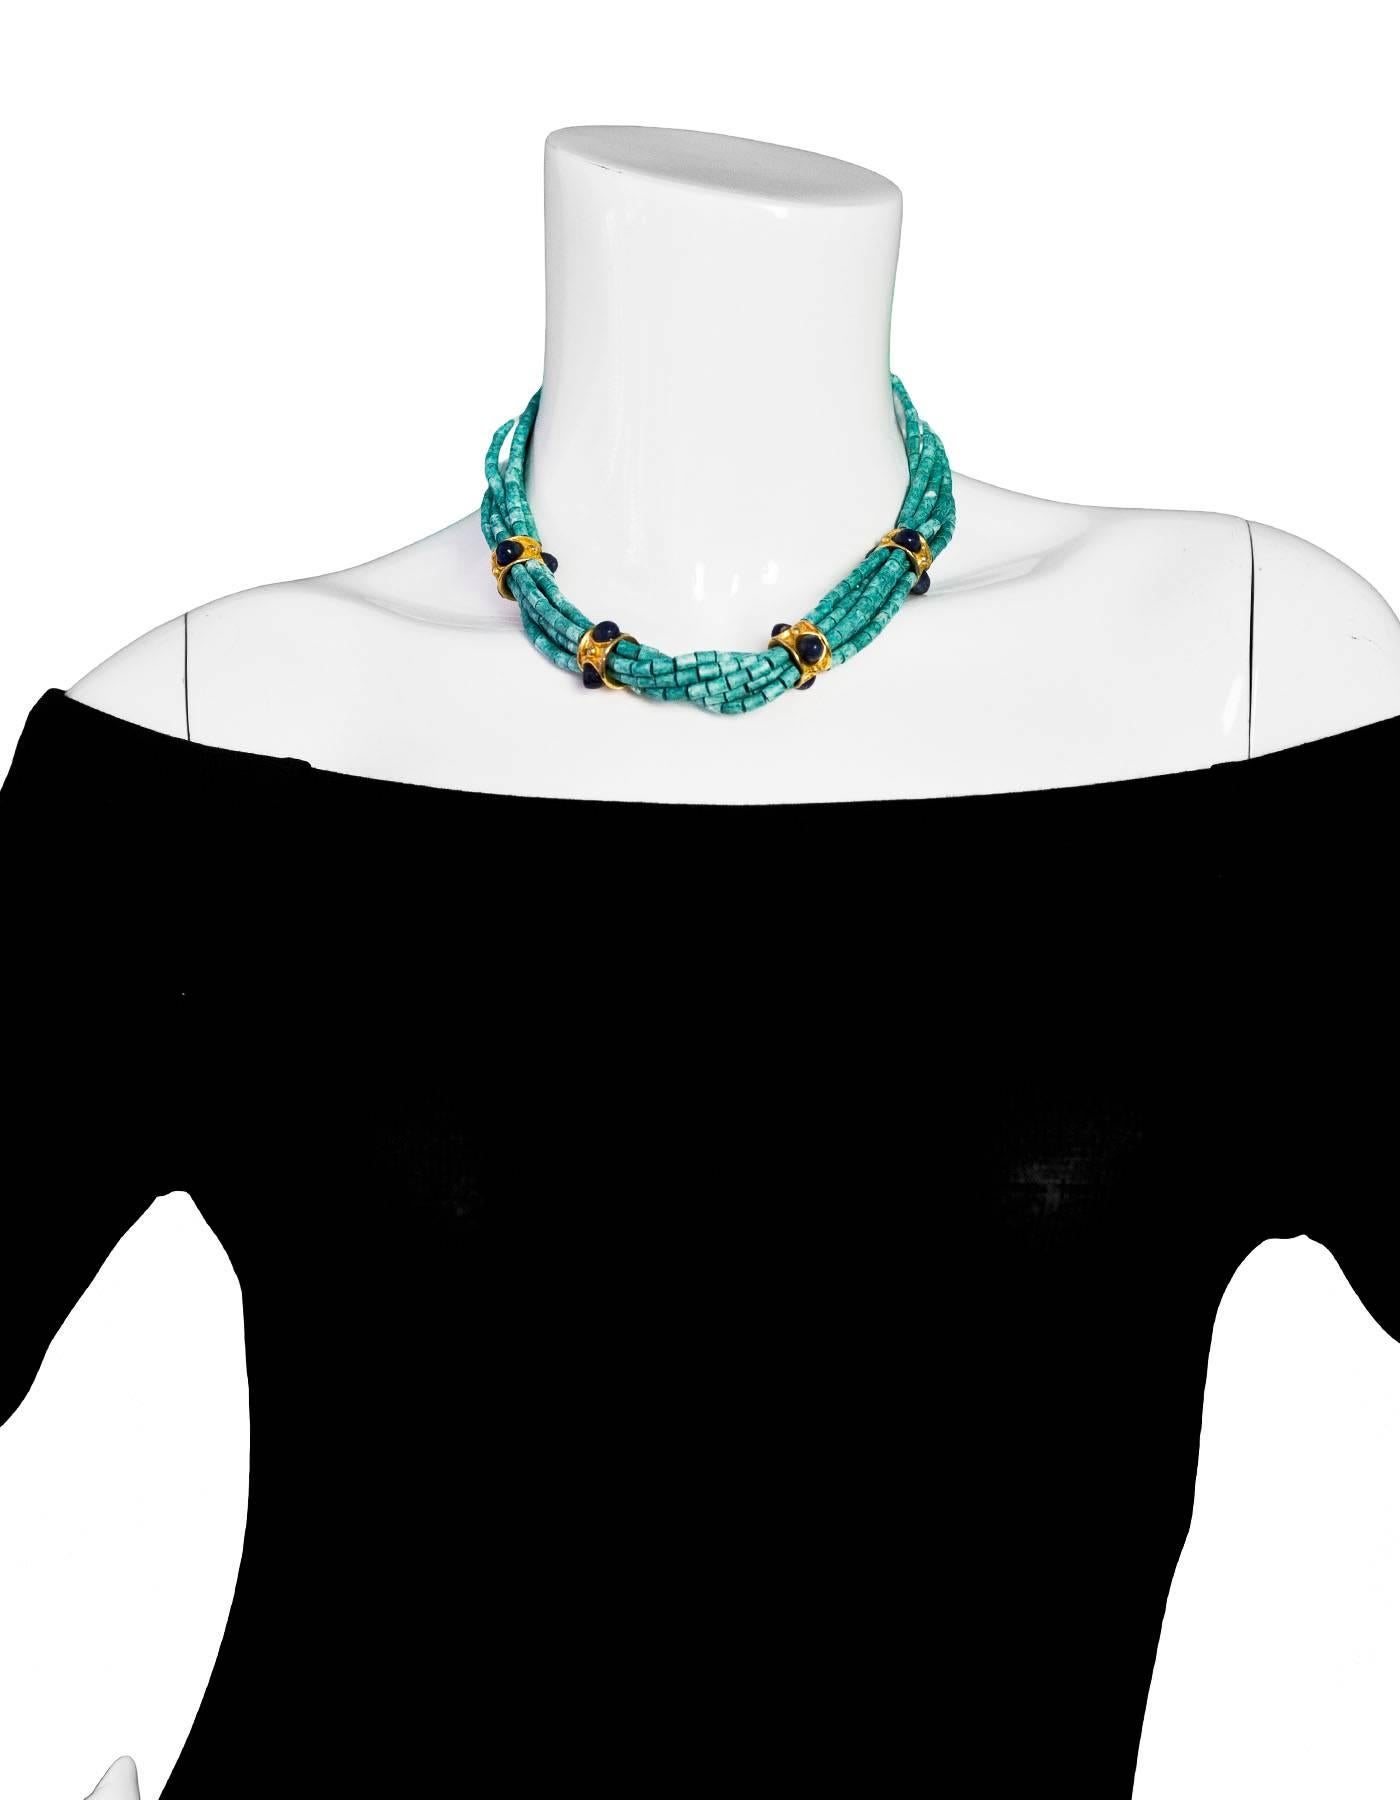 Francesca Romana Turquoise Beaded Necklace

Color: Blue
Materials: Turquoise, metal, stones
Stamp: FR
Overall Condition: Excellent pre-owned condition, light tarnish at gold hardware

Measurements:
Length: 16"